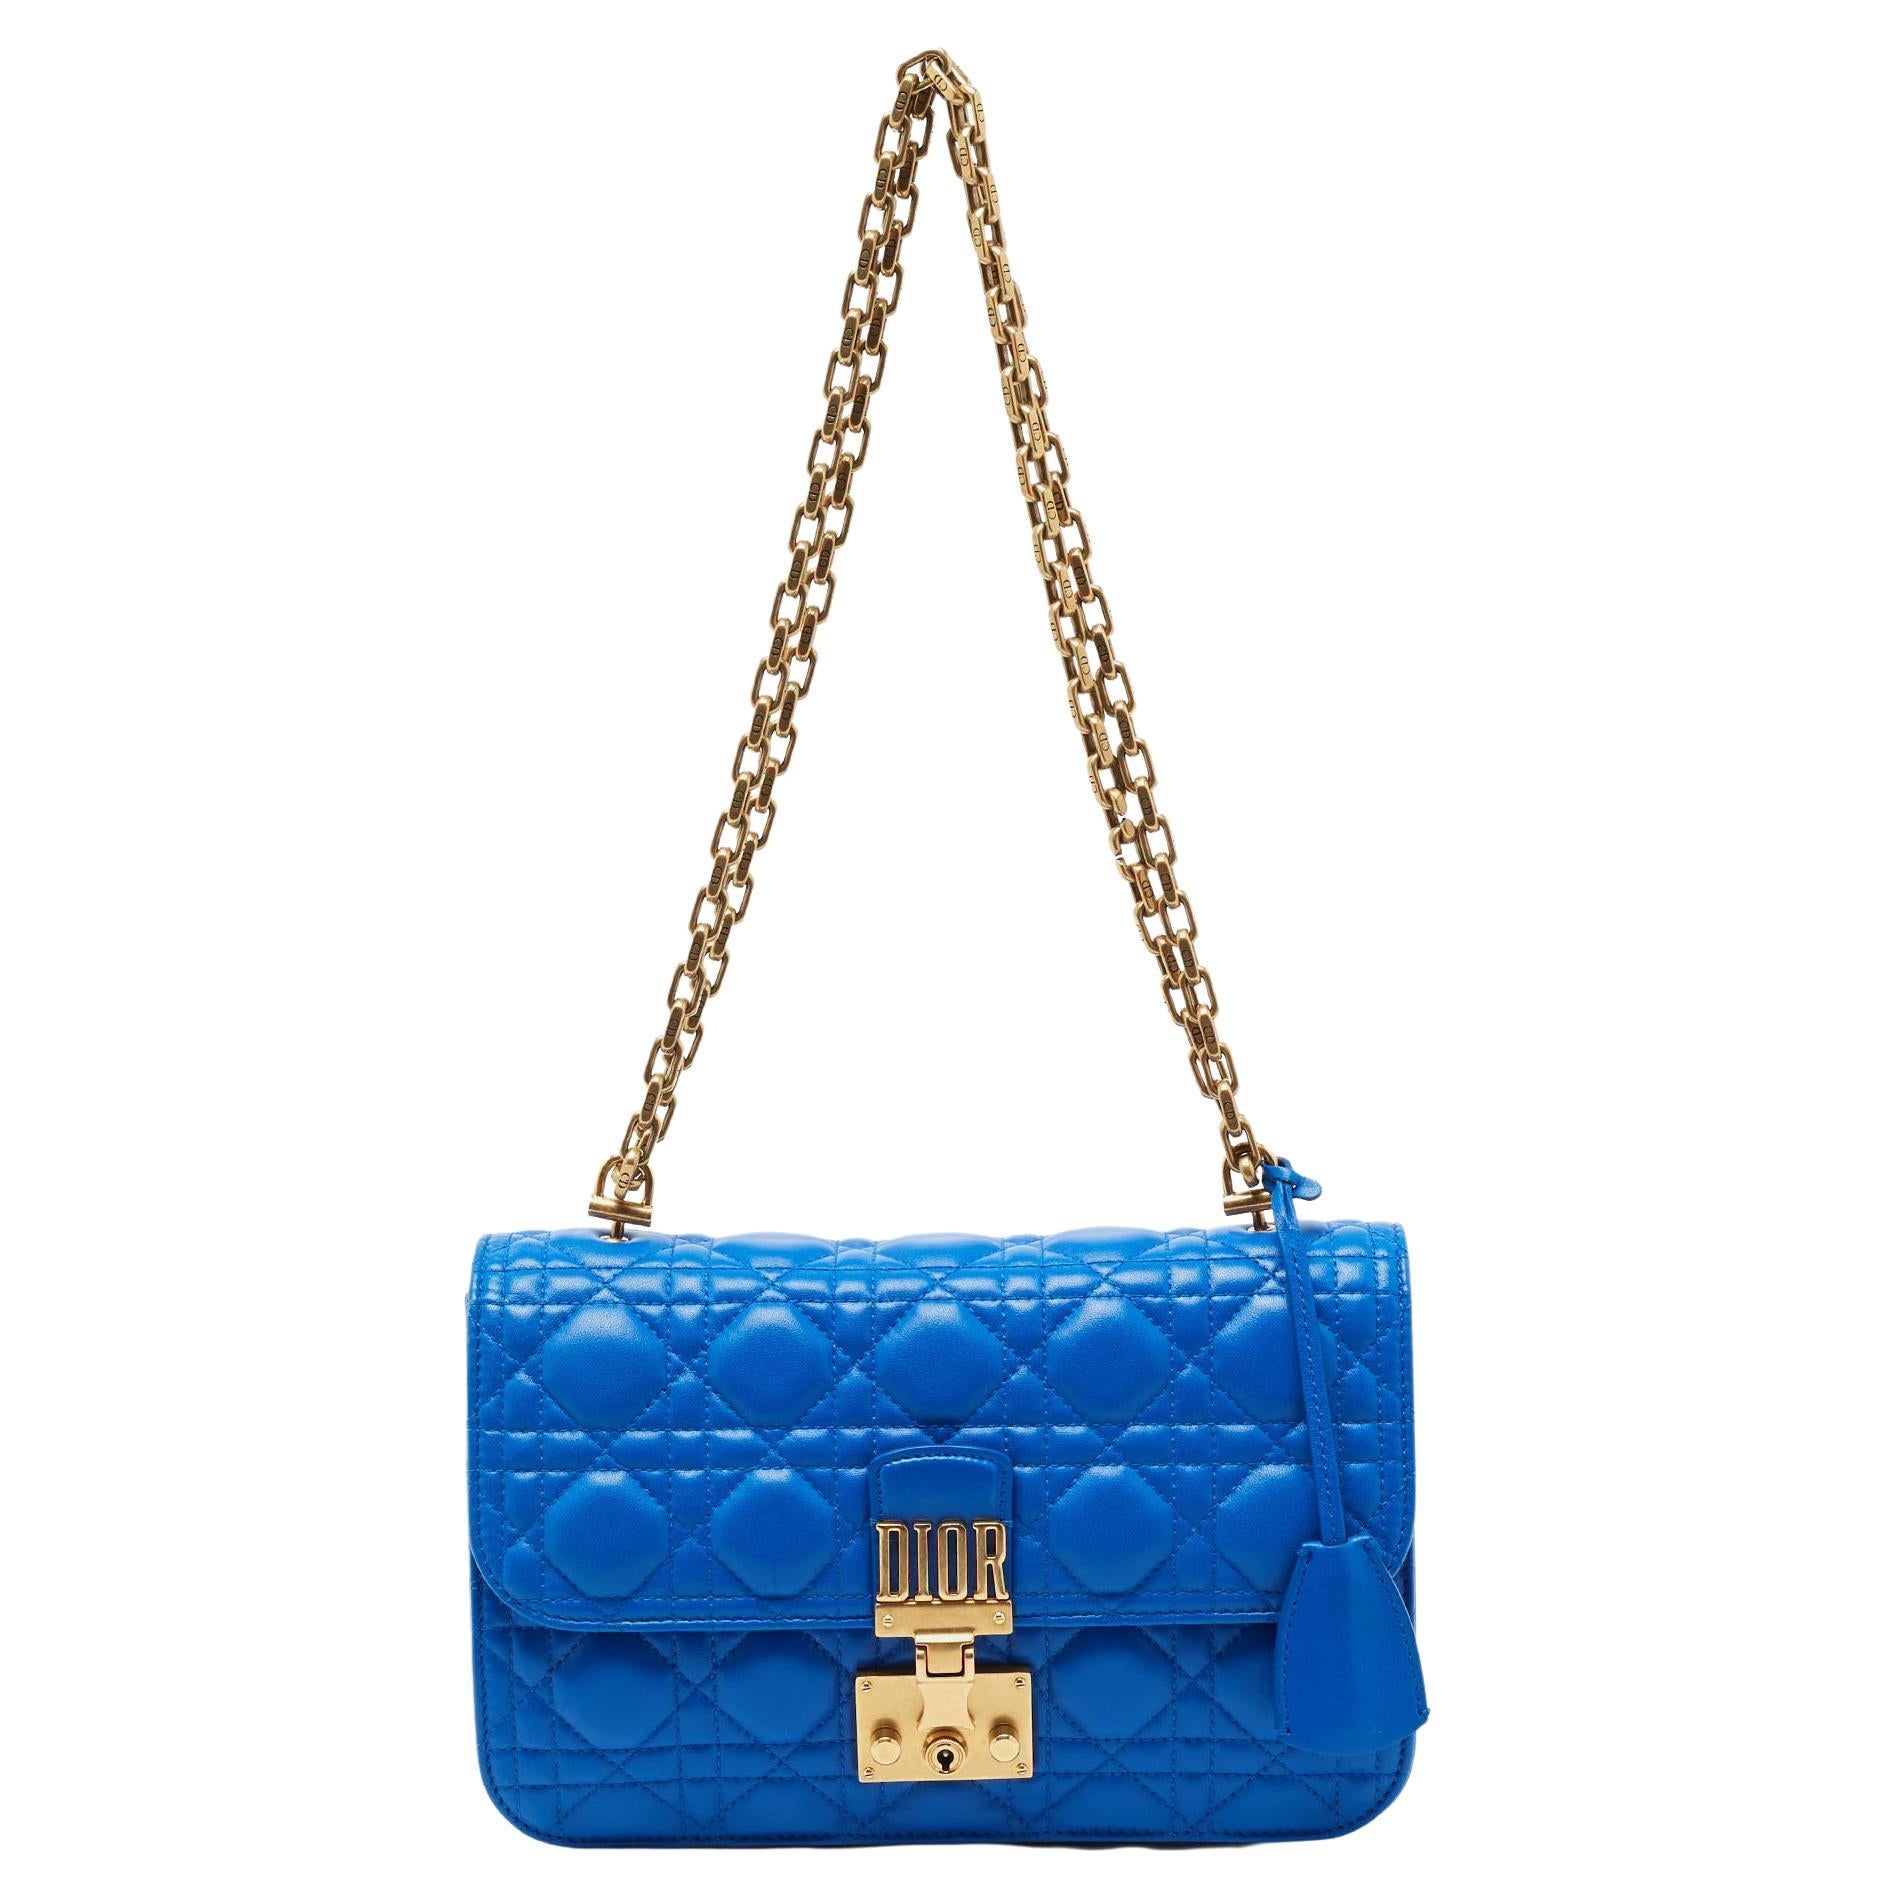 S/S 2006 Dior Double Gaucho Teal Blue Leather Saddle bag at 1stDibs ...